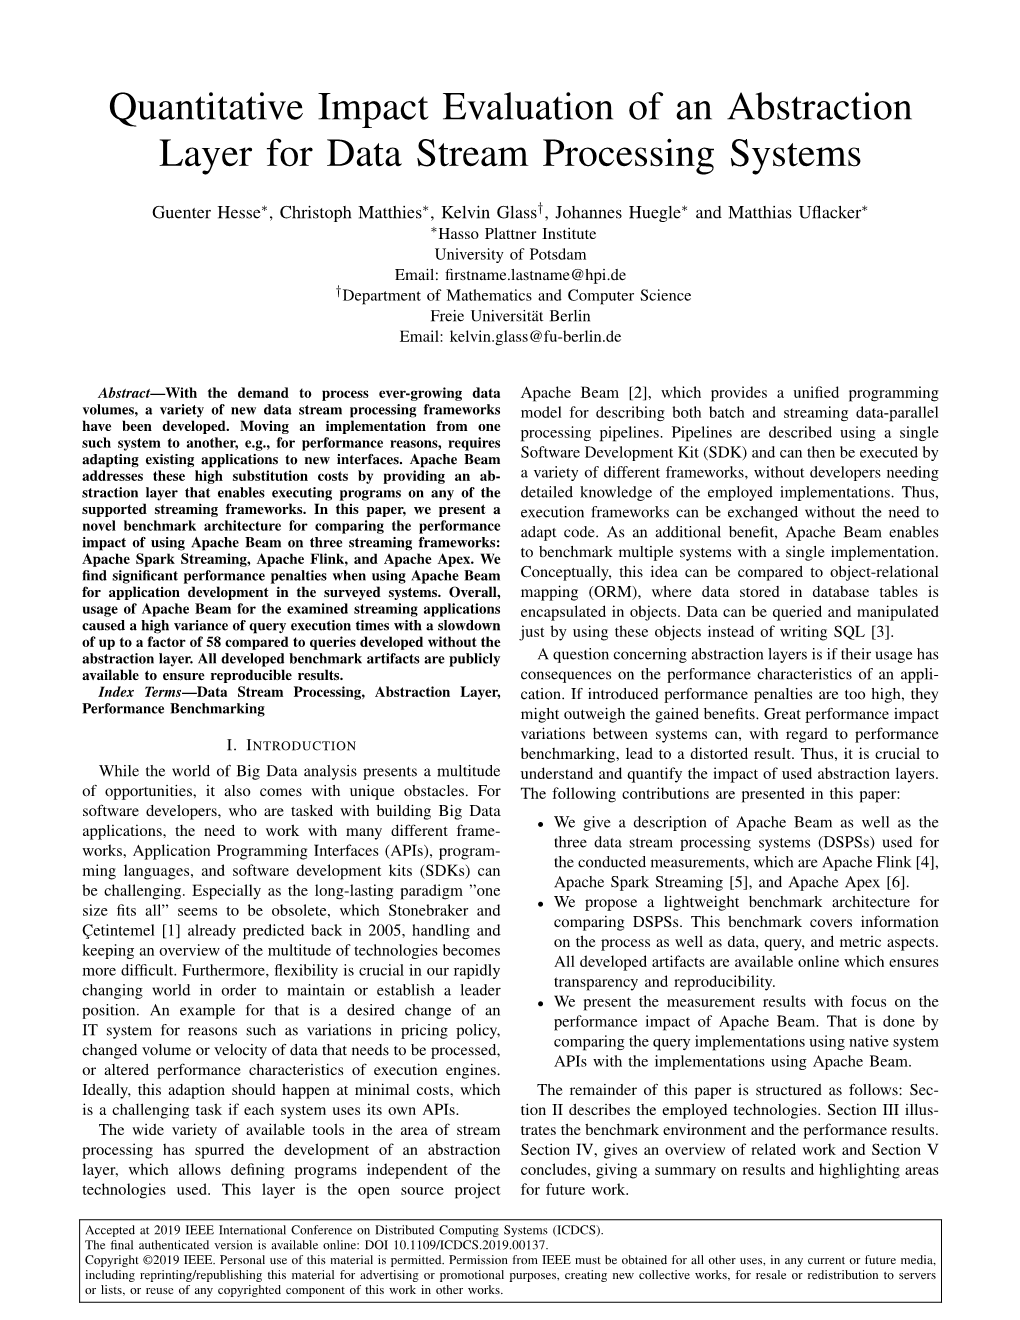 Quantitative Impact Evaluation of an Abstraction Layer for Data Stream Processing Systems